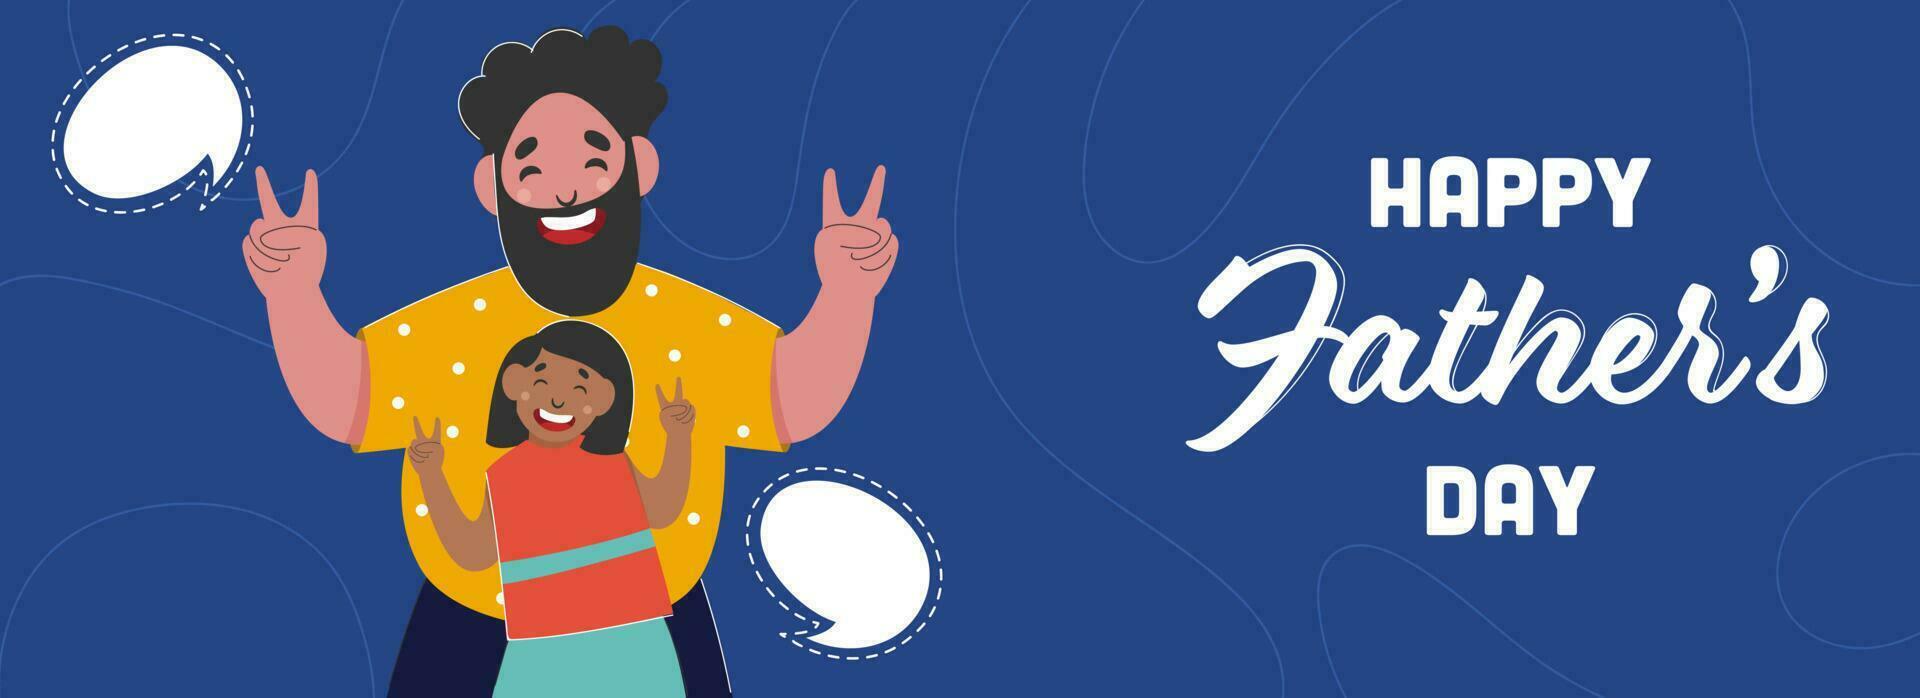 Happy Father's Day Concept With Cheerful Beard Man And His Daughter Giving Peace Sign On Blue Background. vector